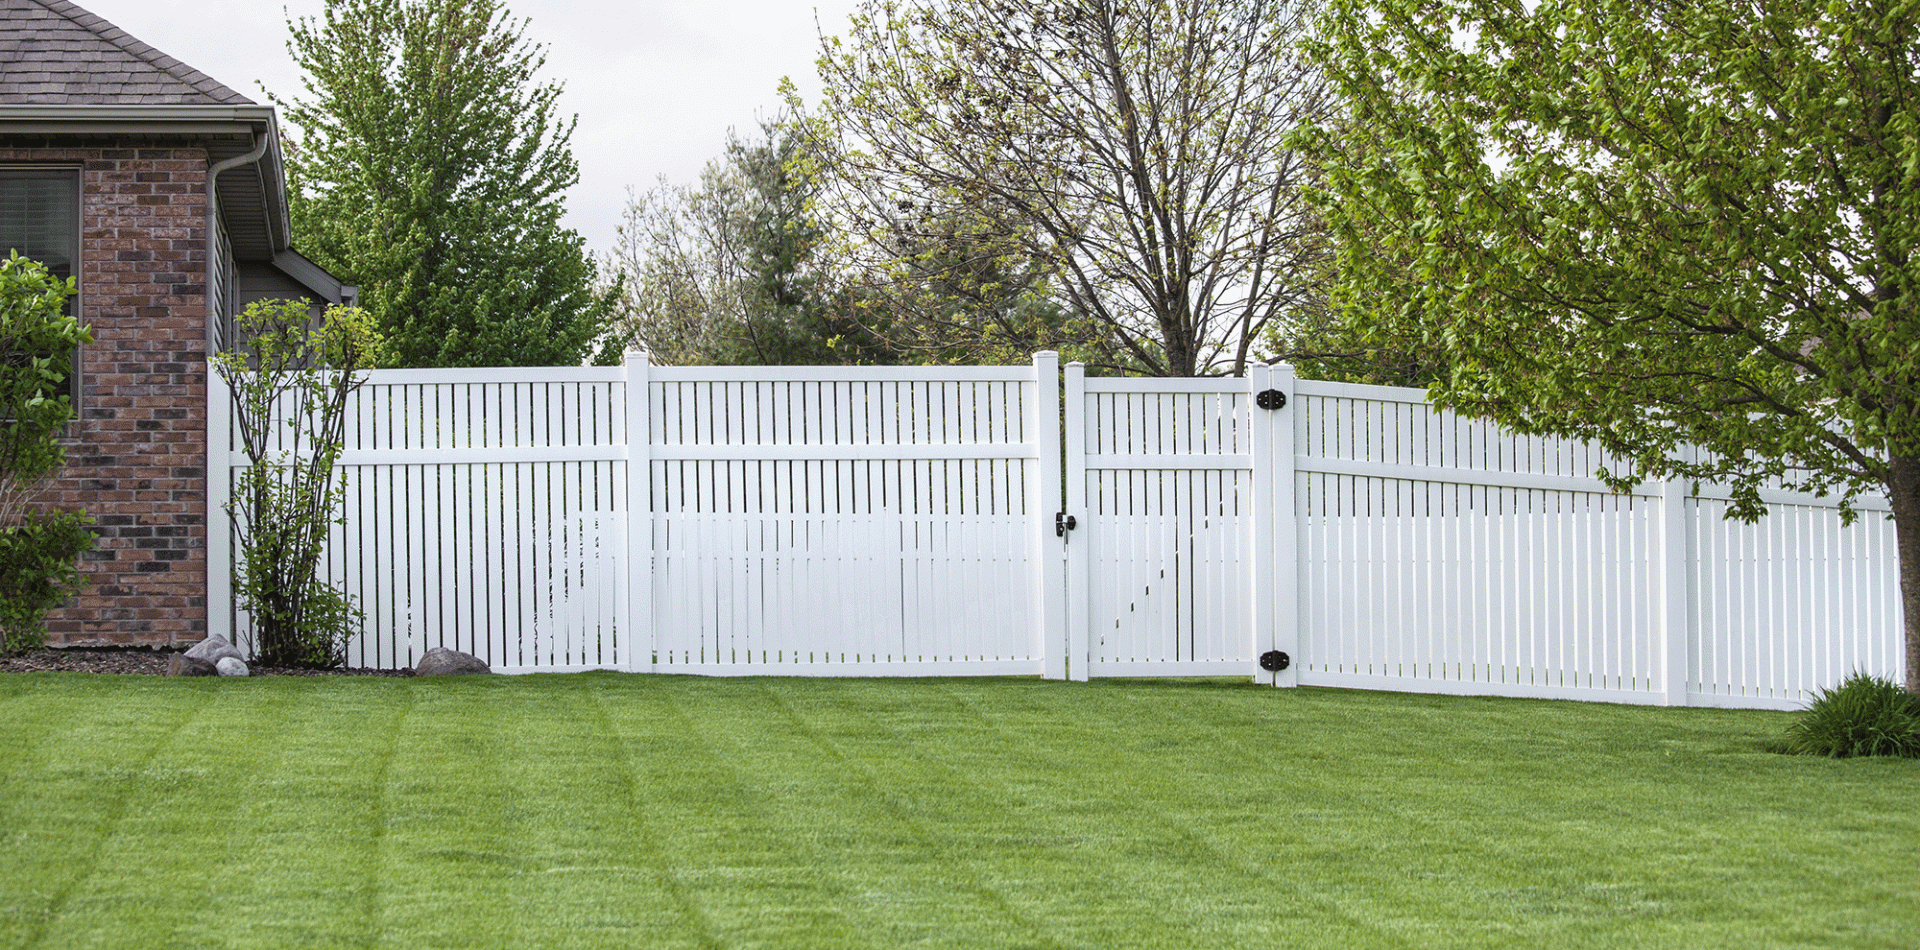 5 Least Expensive Fencing Ideas to Protect Your Yard